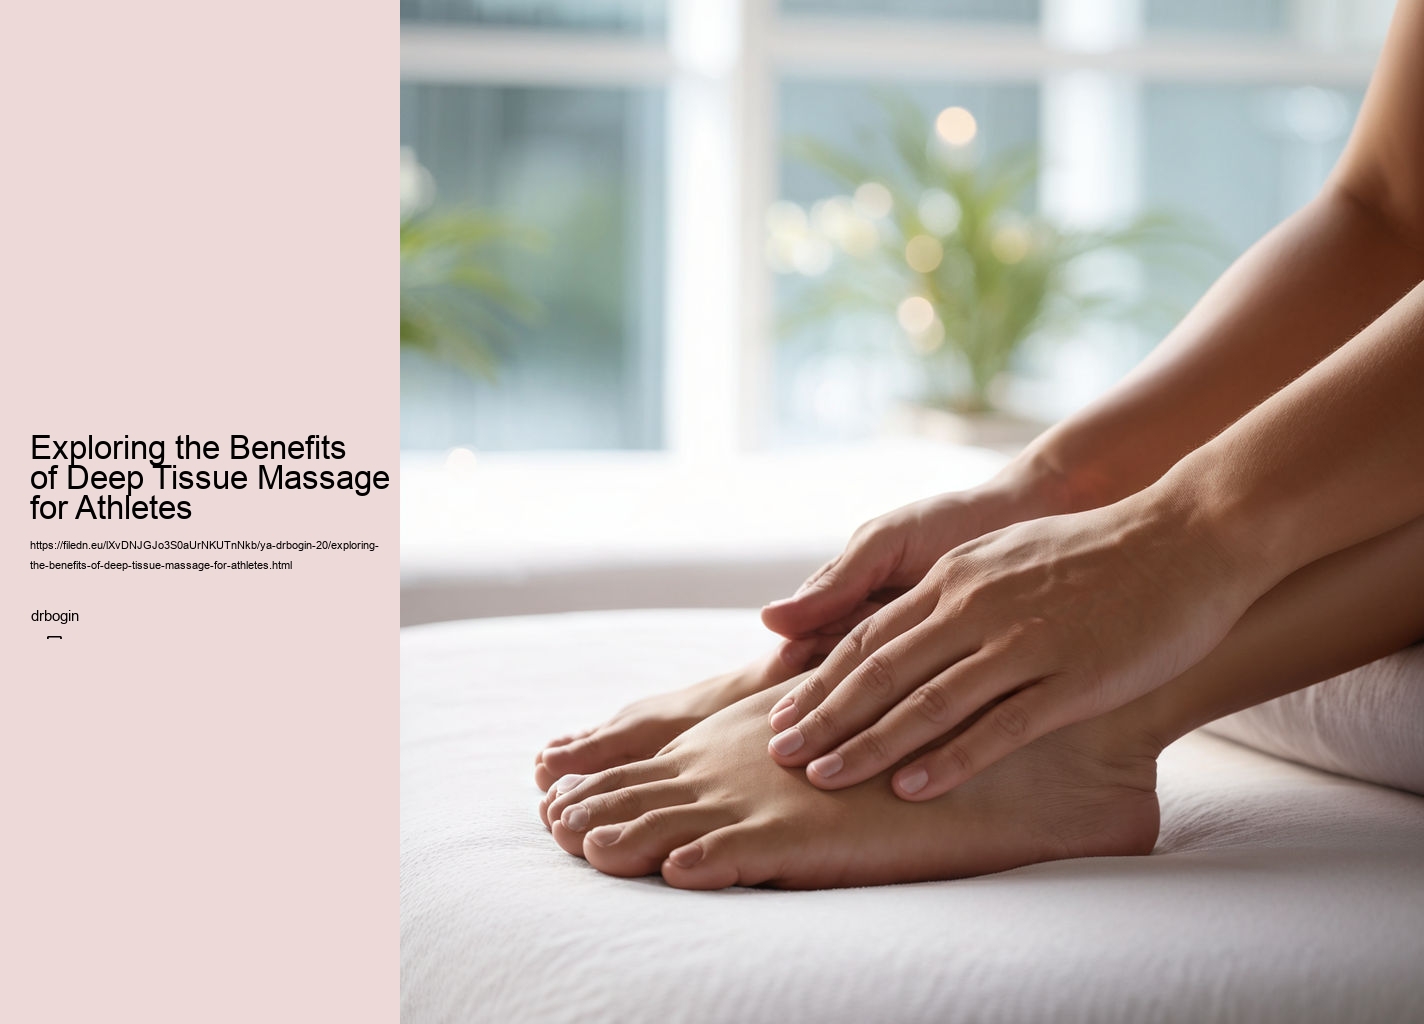 Exploring the Benefits of Deep Tissue Massage for Athletes